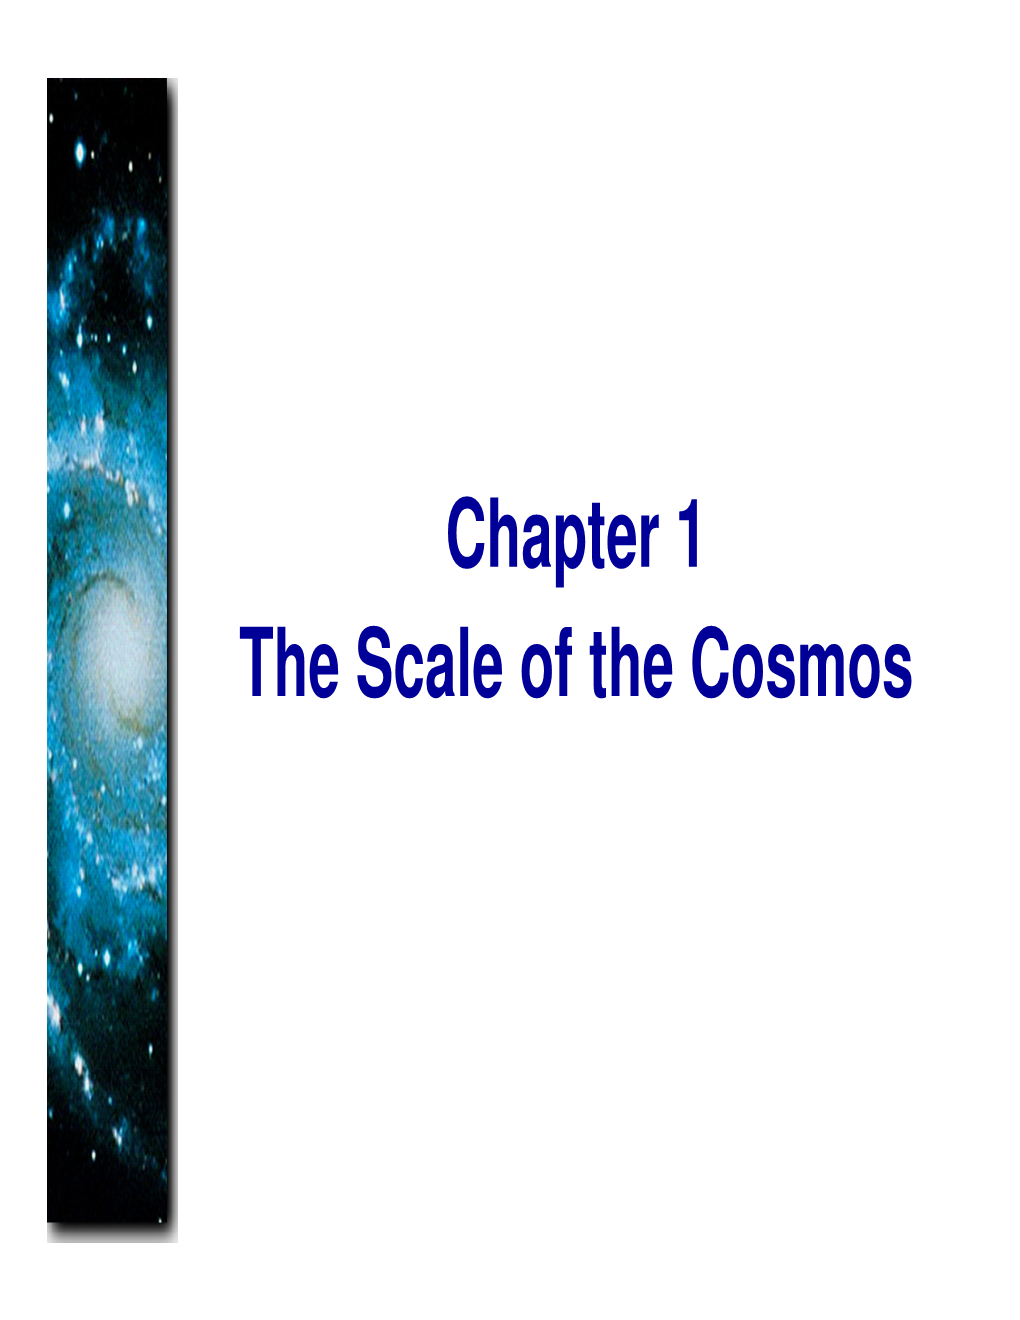 The Scale of the Cosmos Chapter 1 the Scale of the Cosmos